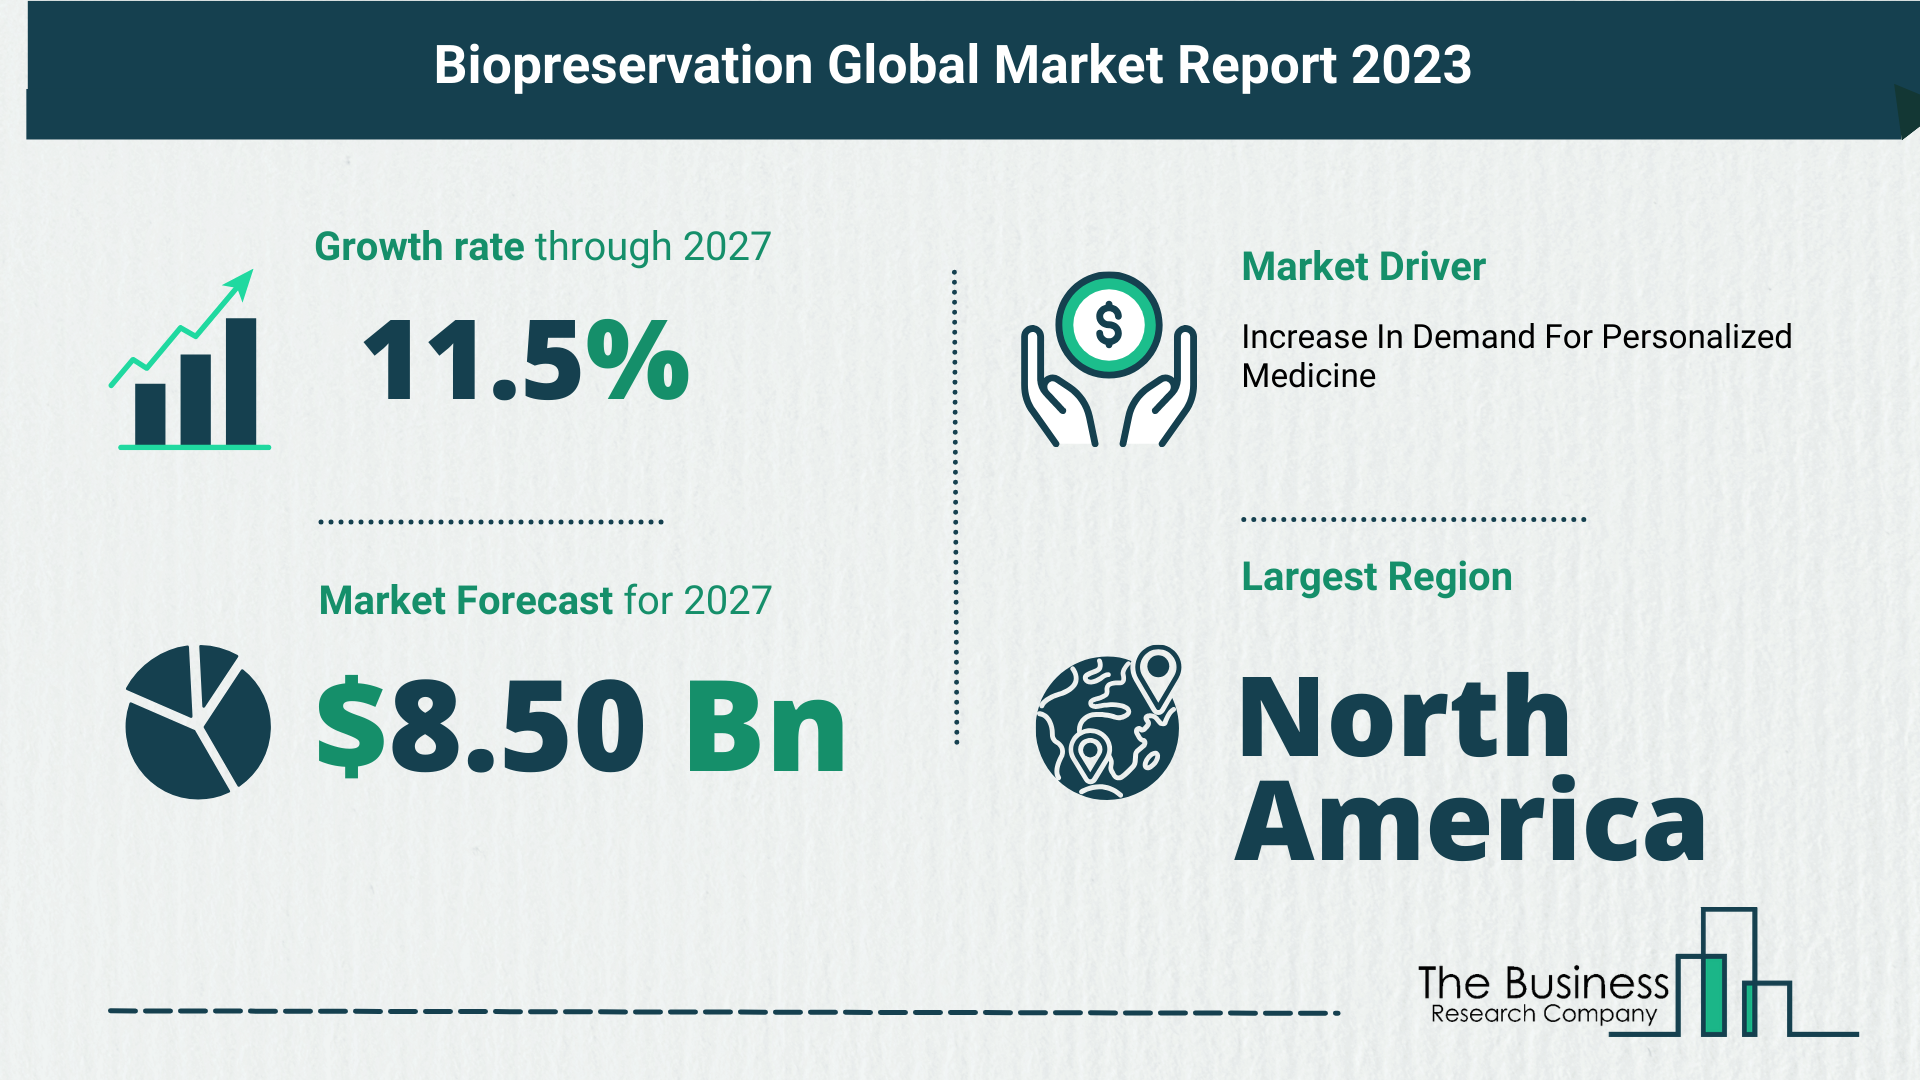 Overview Of The Biopreservation Market 2023: Size, Drivers, And Trends